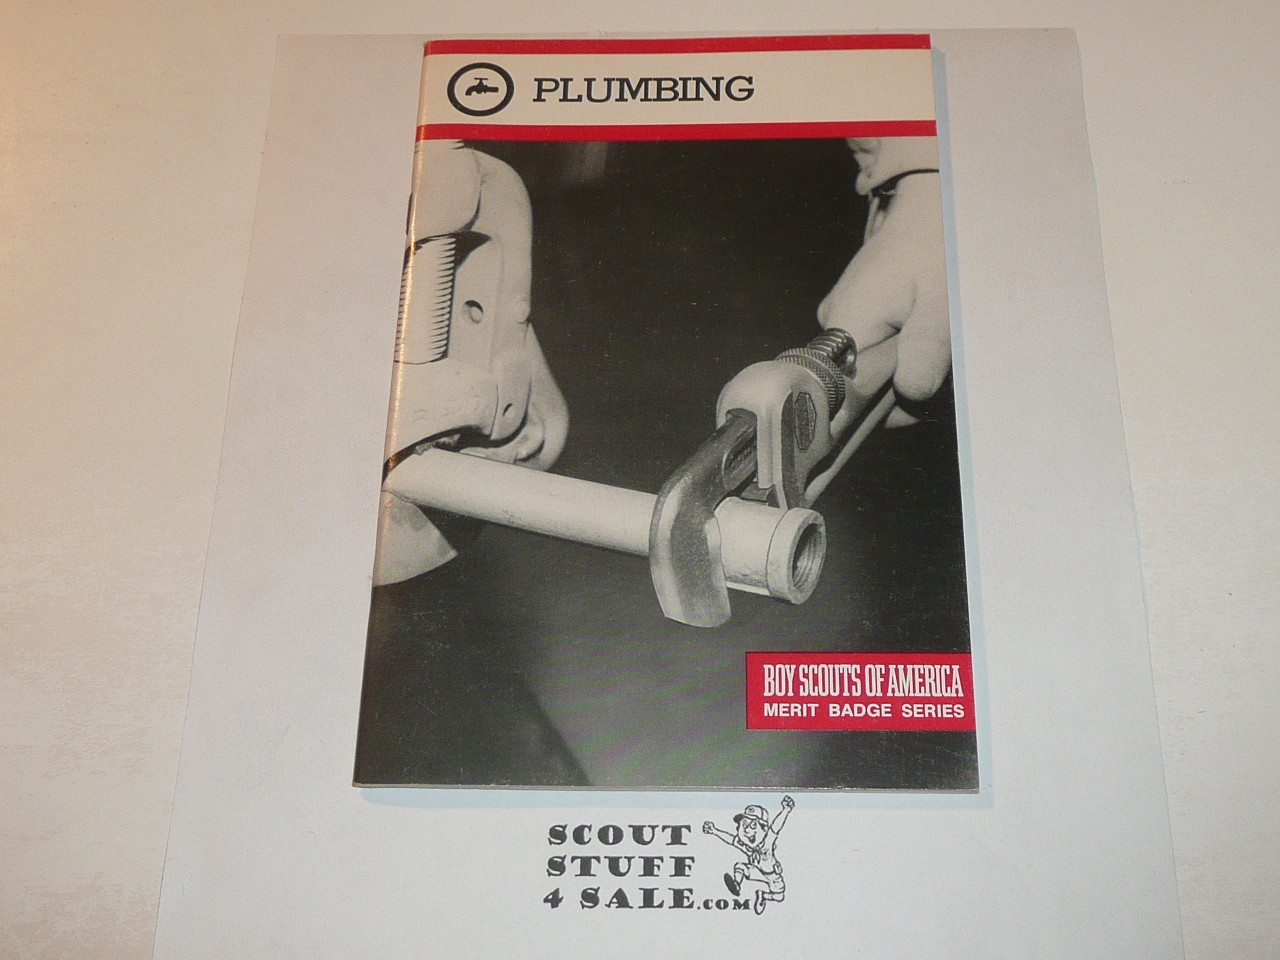 Plumbing Merit Badge Pamphlet, Type 9, Red Band Cover, 3-84 Printing